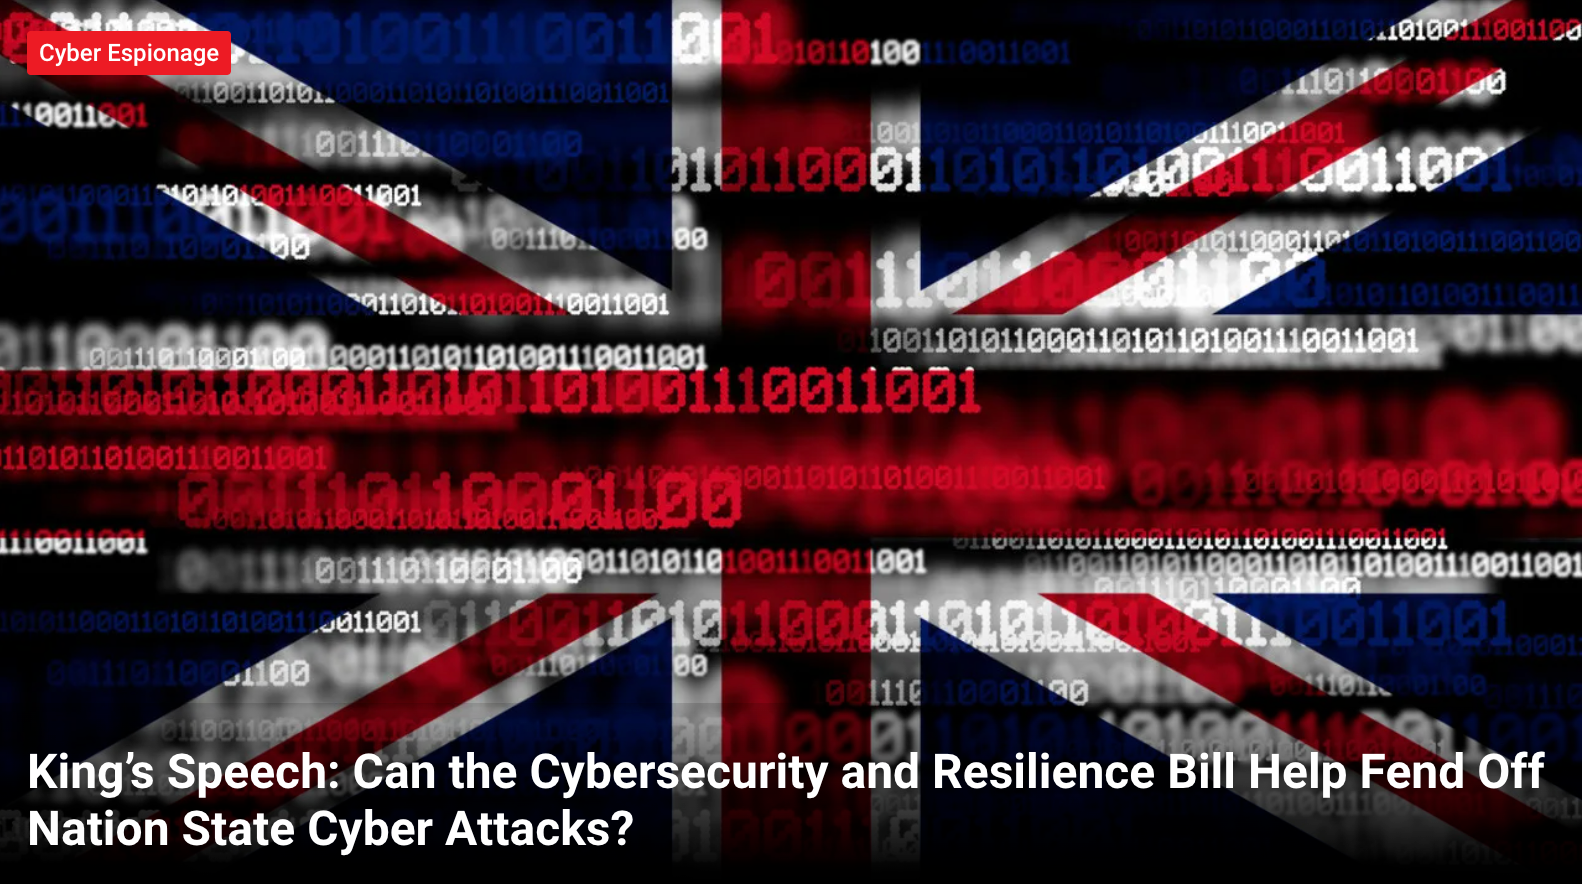 King’s Speech: Can the Cybersecurity and Resilience Bill Help Fend Off Nation State Cyber Attacks?